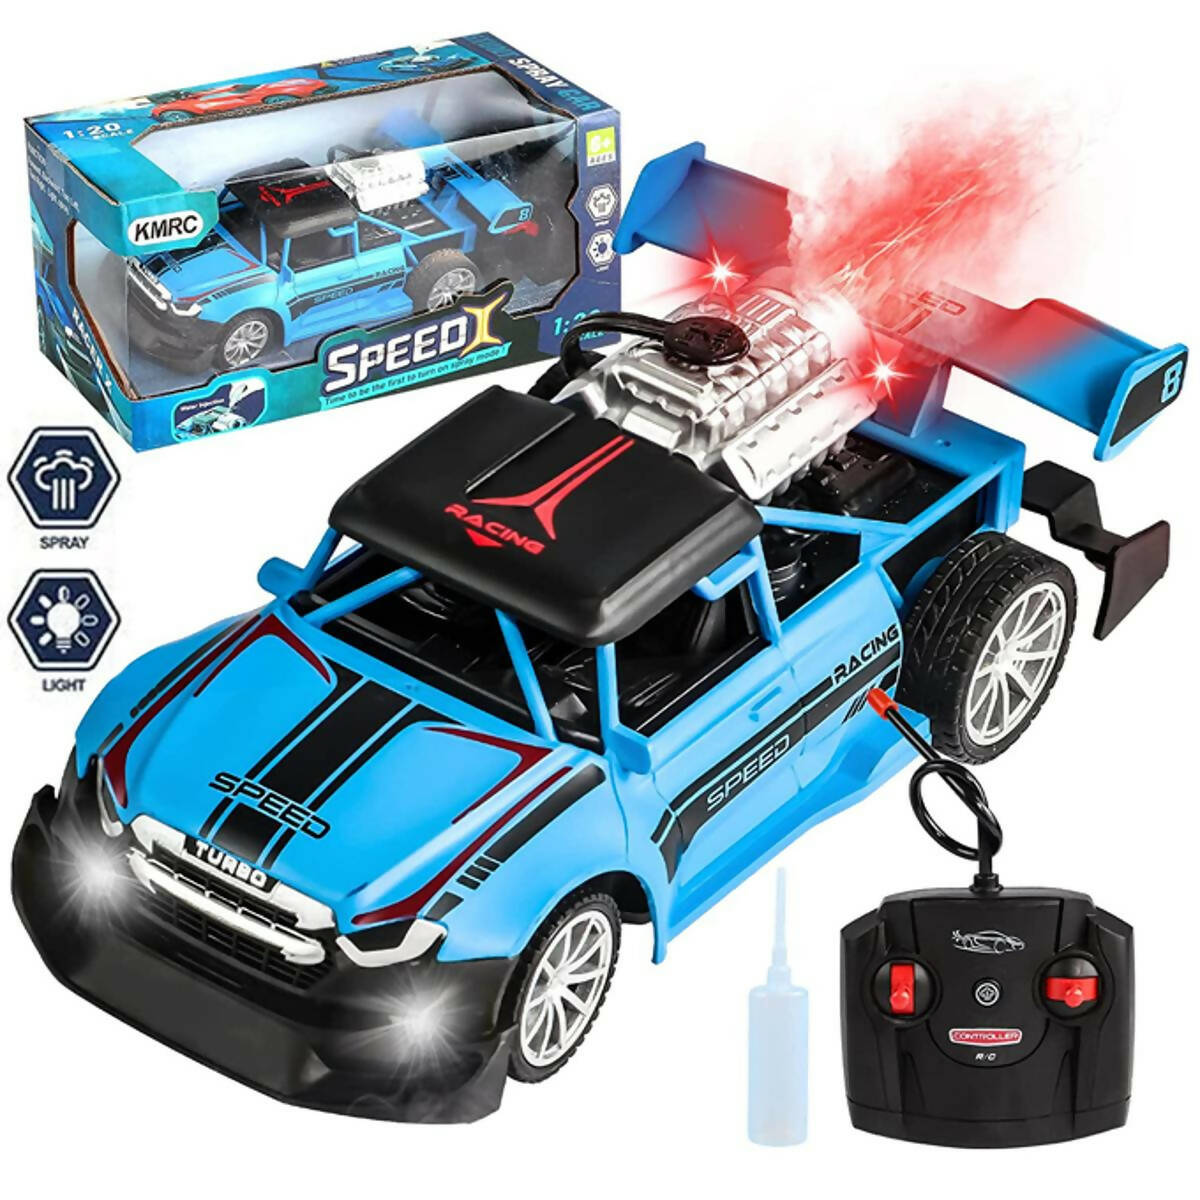 Remote Control Rock Monster Car with Lights & Flame Spray Function Stunt Car - Operated Battery - Blue